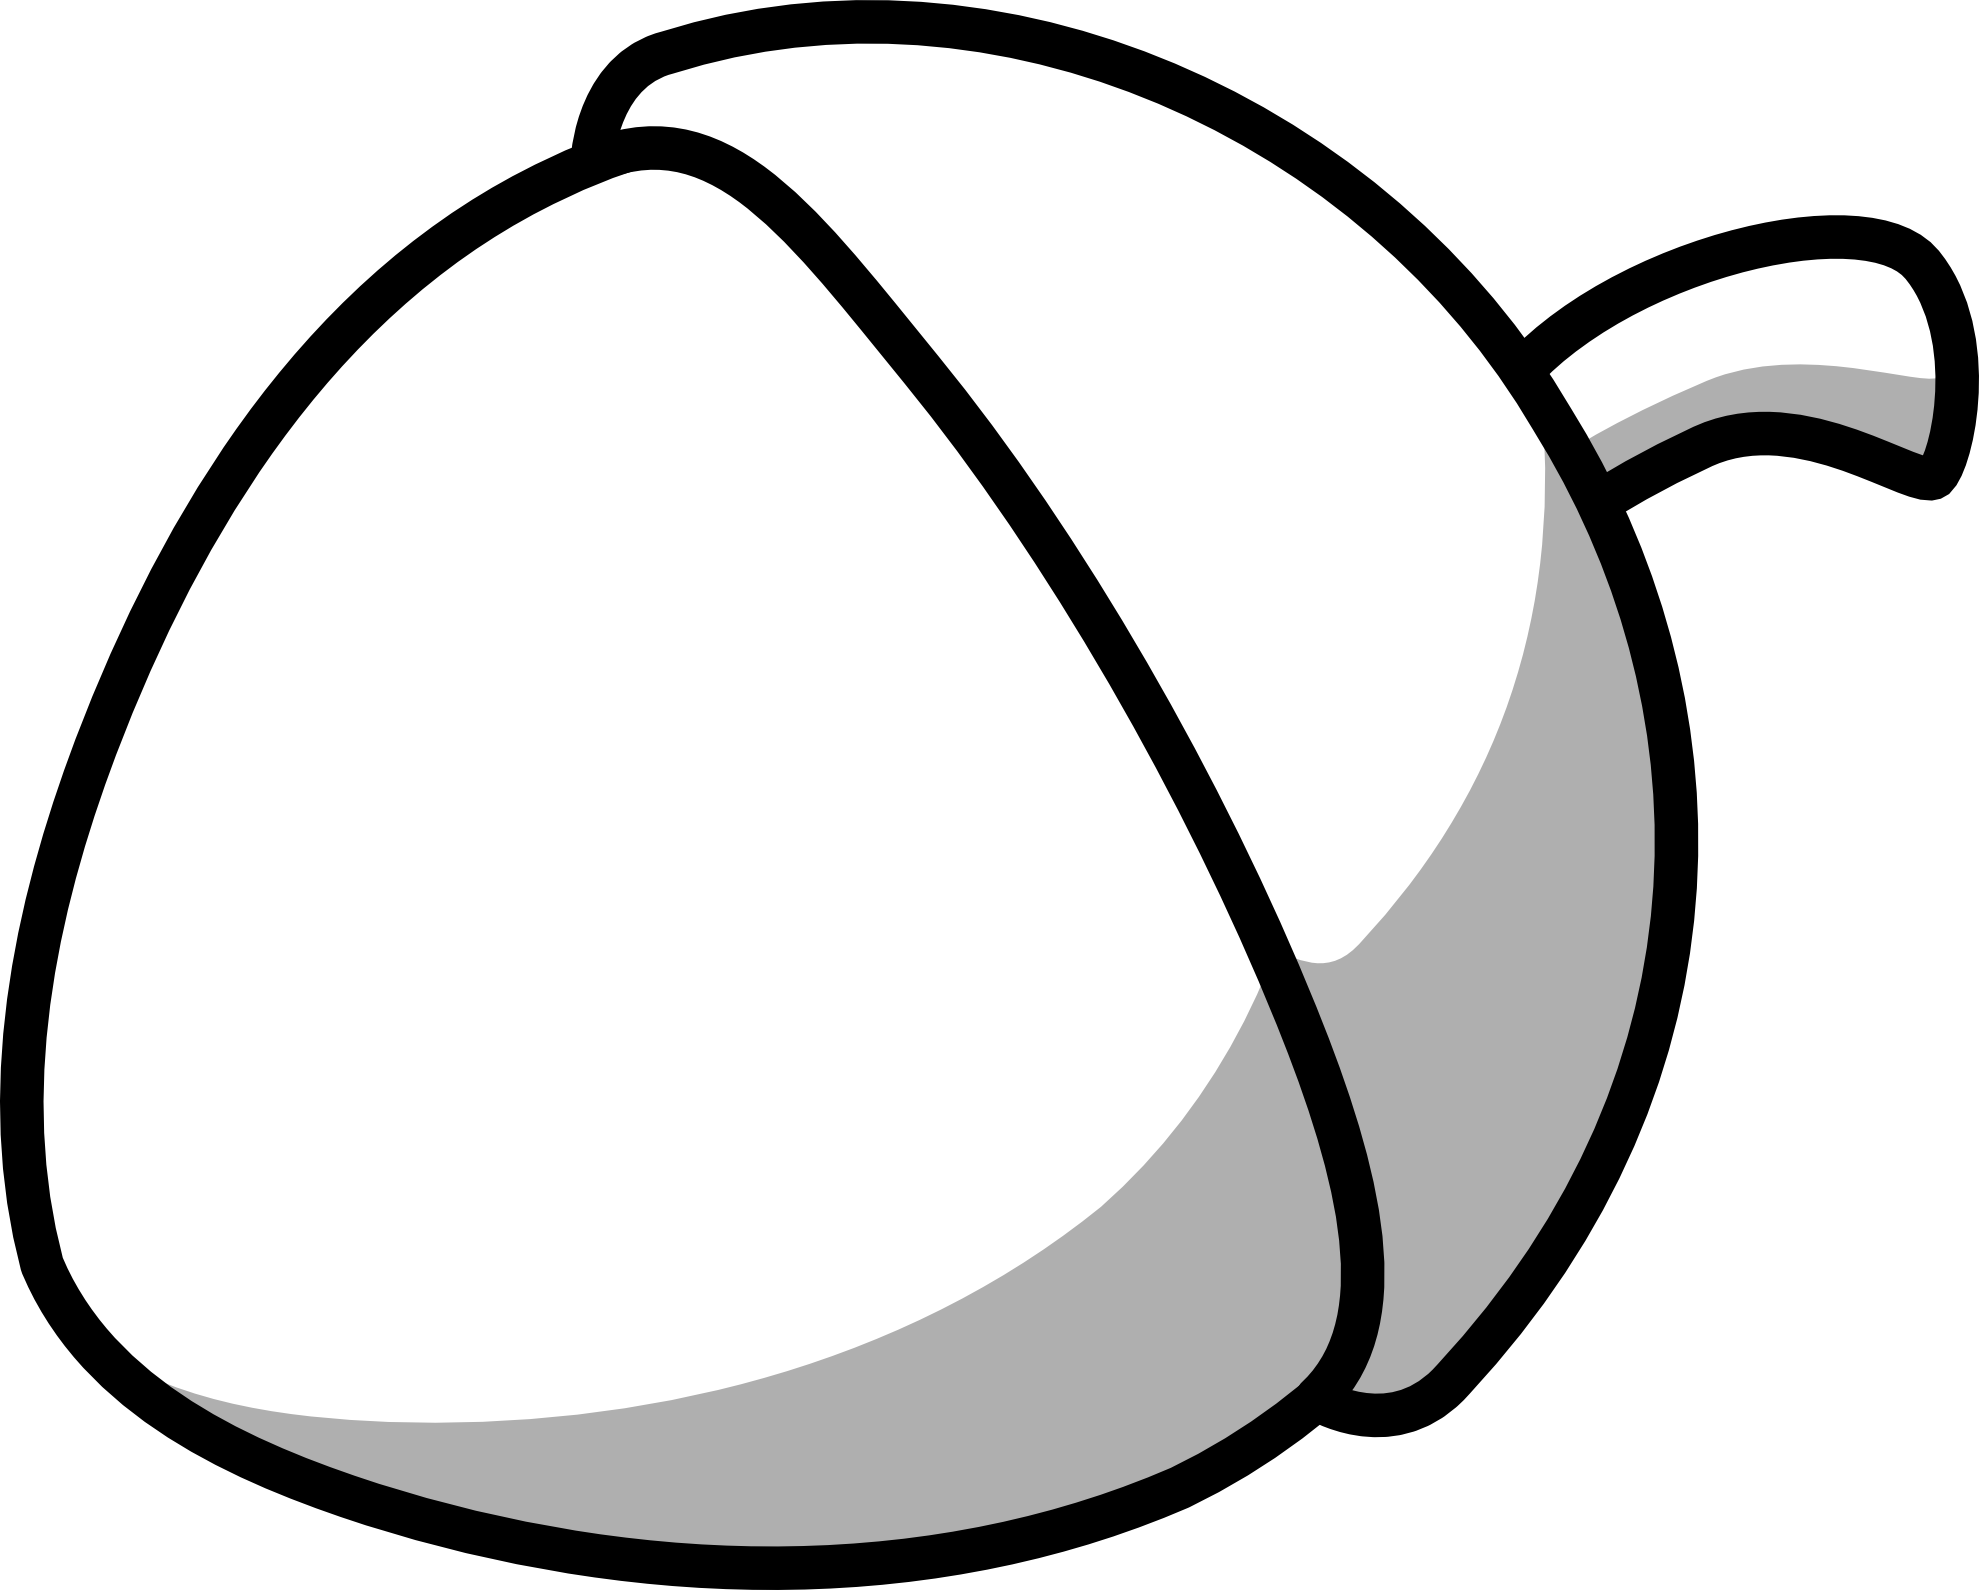 Acorn Clipart Black And White | Clipart library - Free Clipart Images